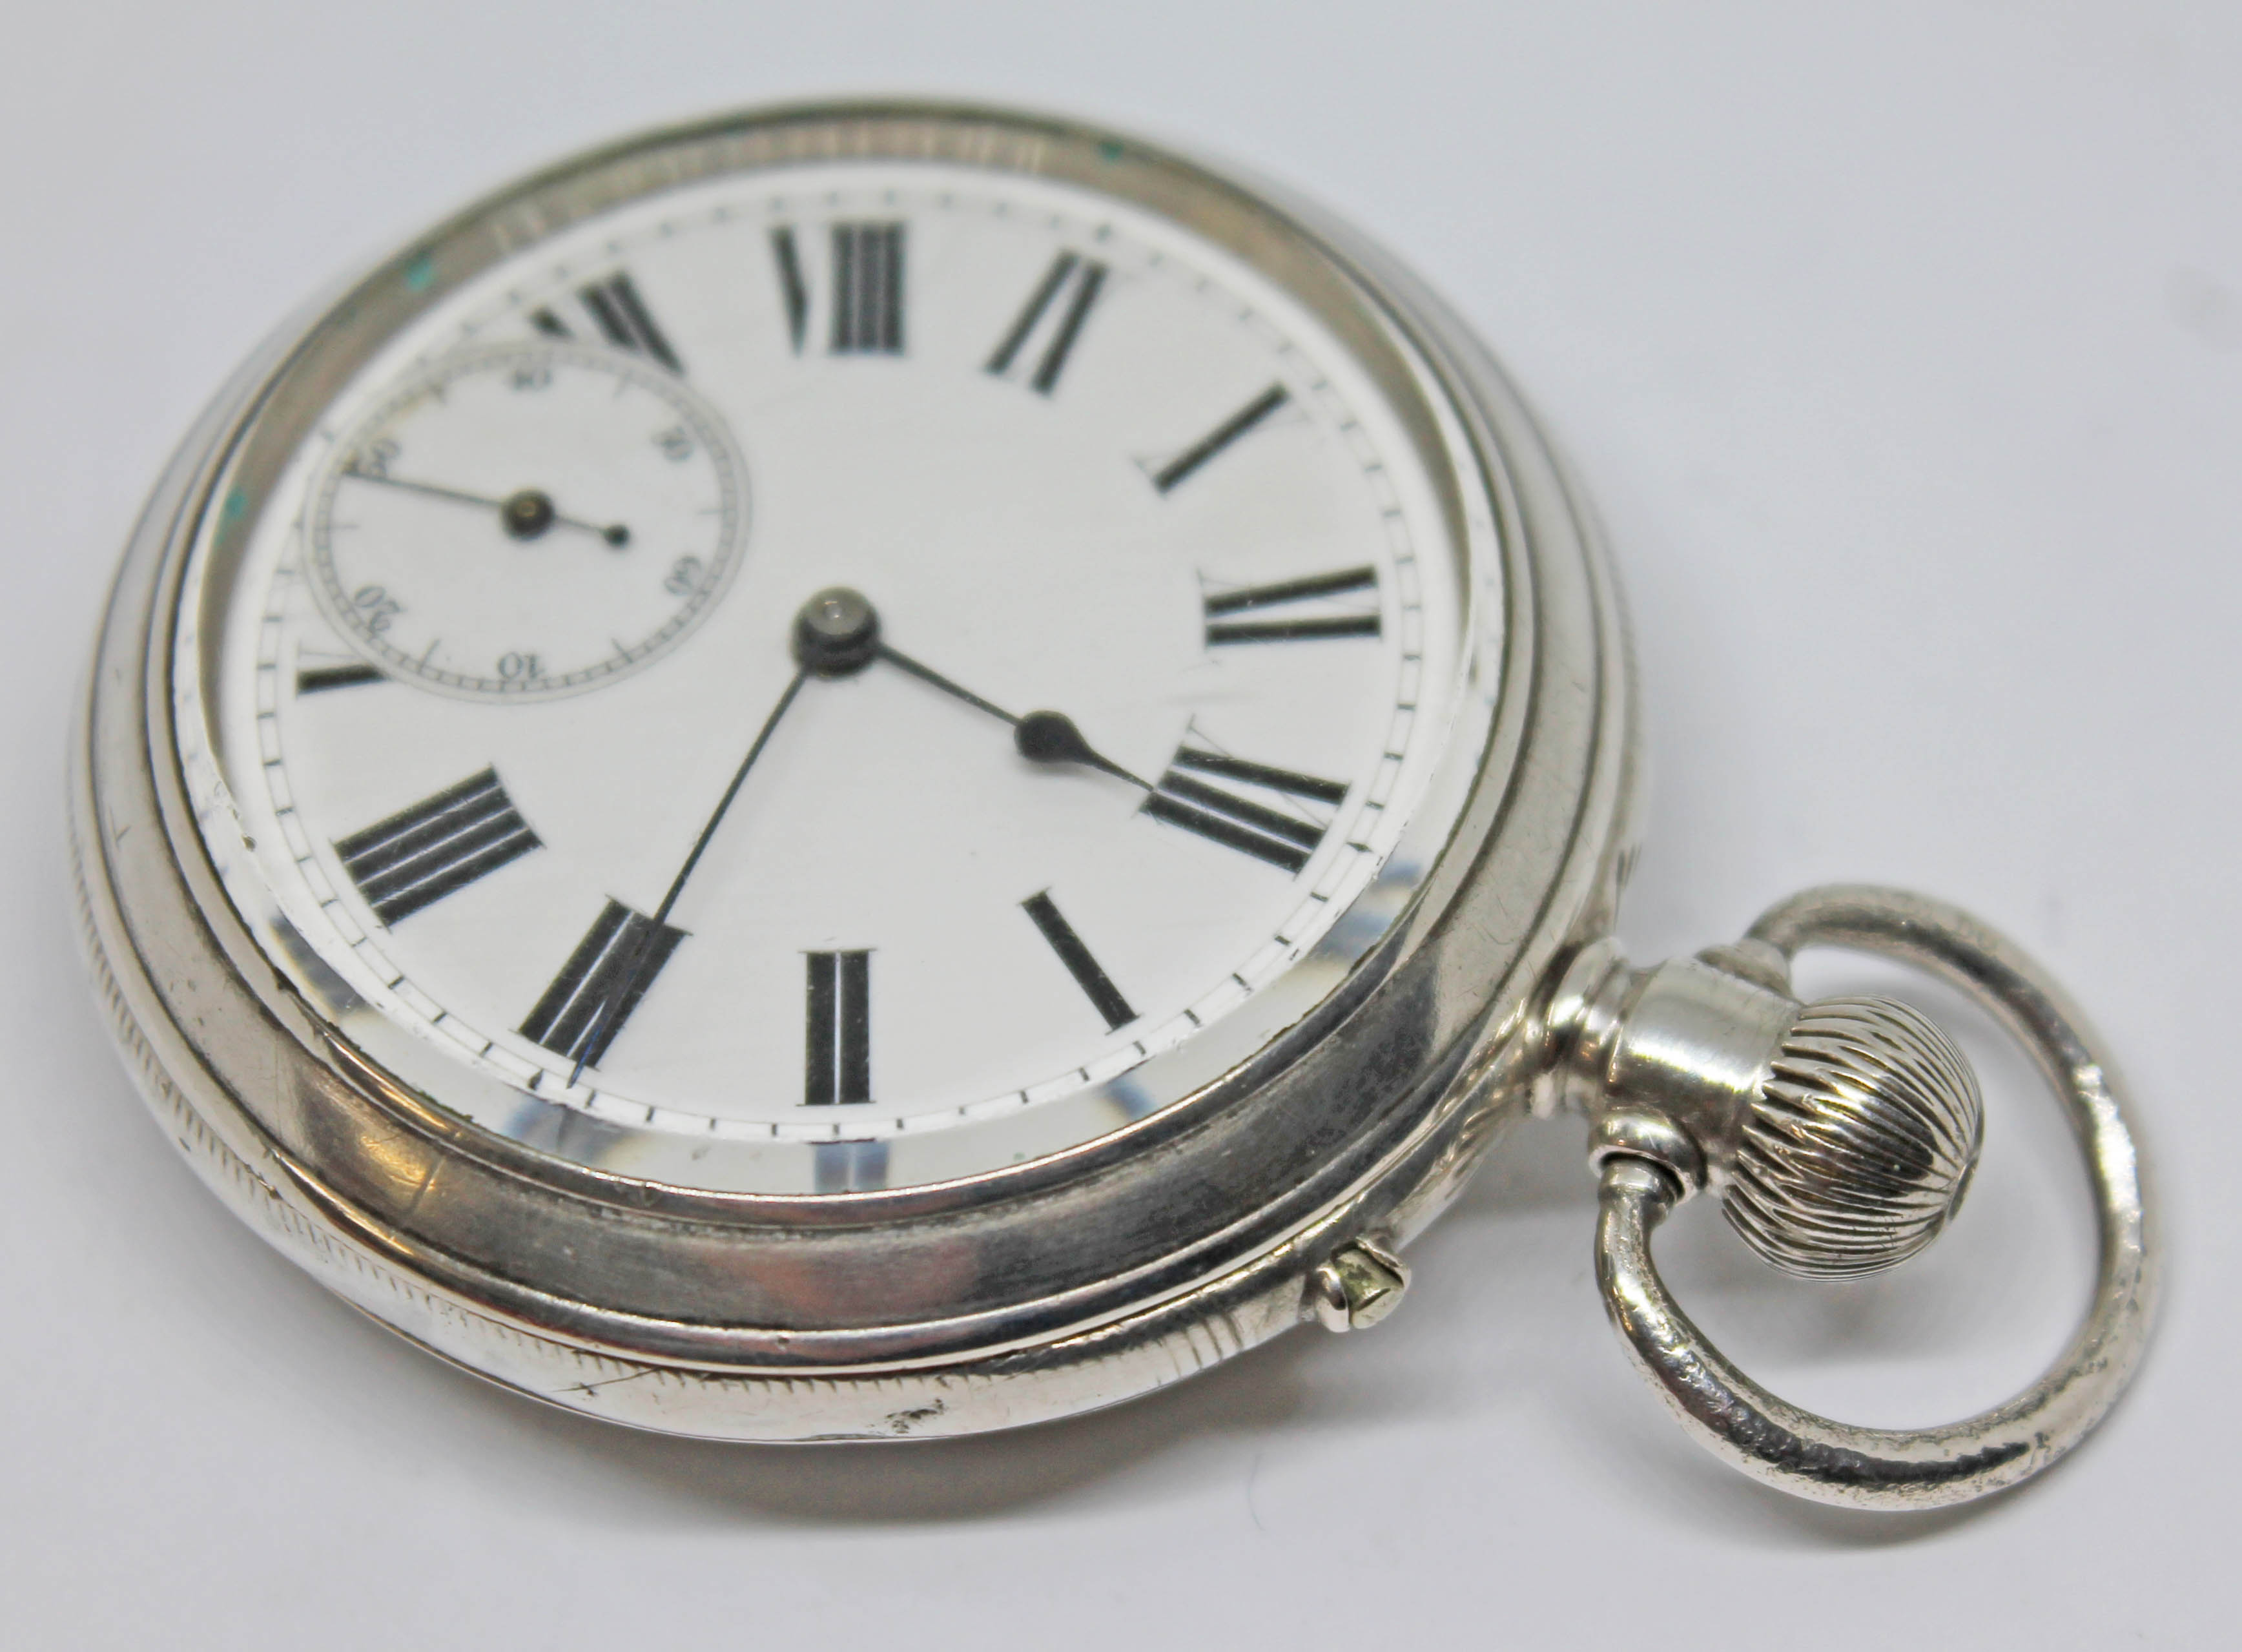 A silver cased Baume & Co pocket watch with white enamel dial, Roman numerals, spade hands and